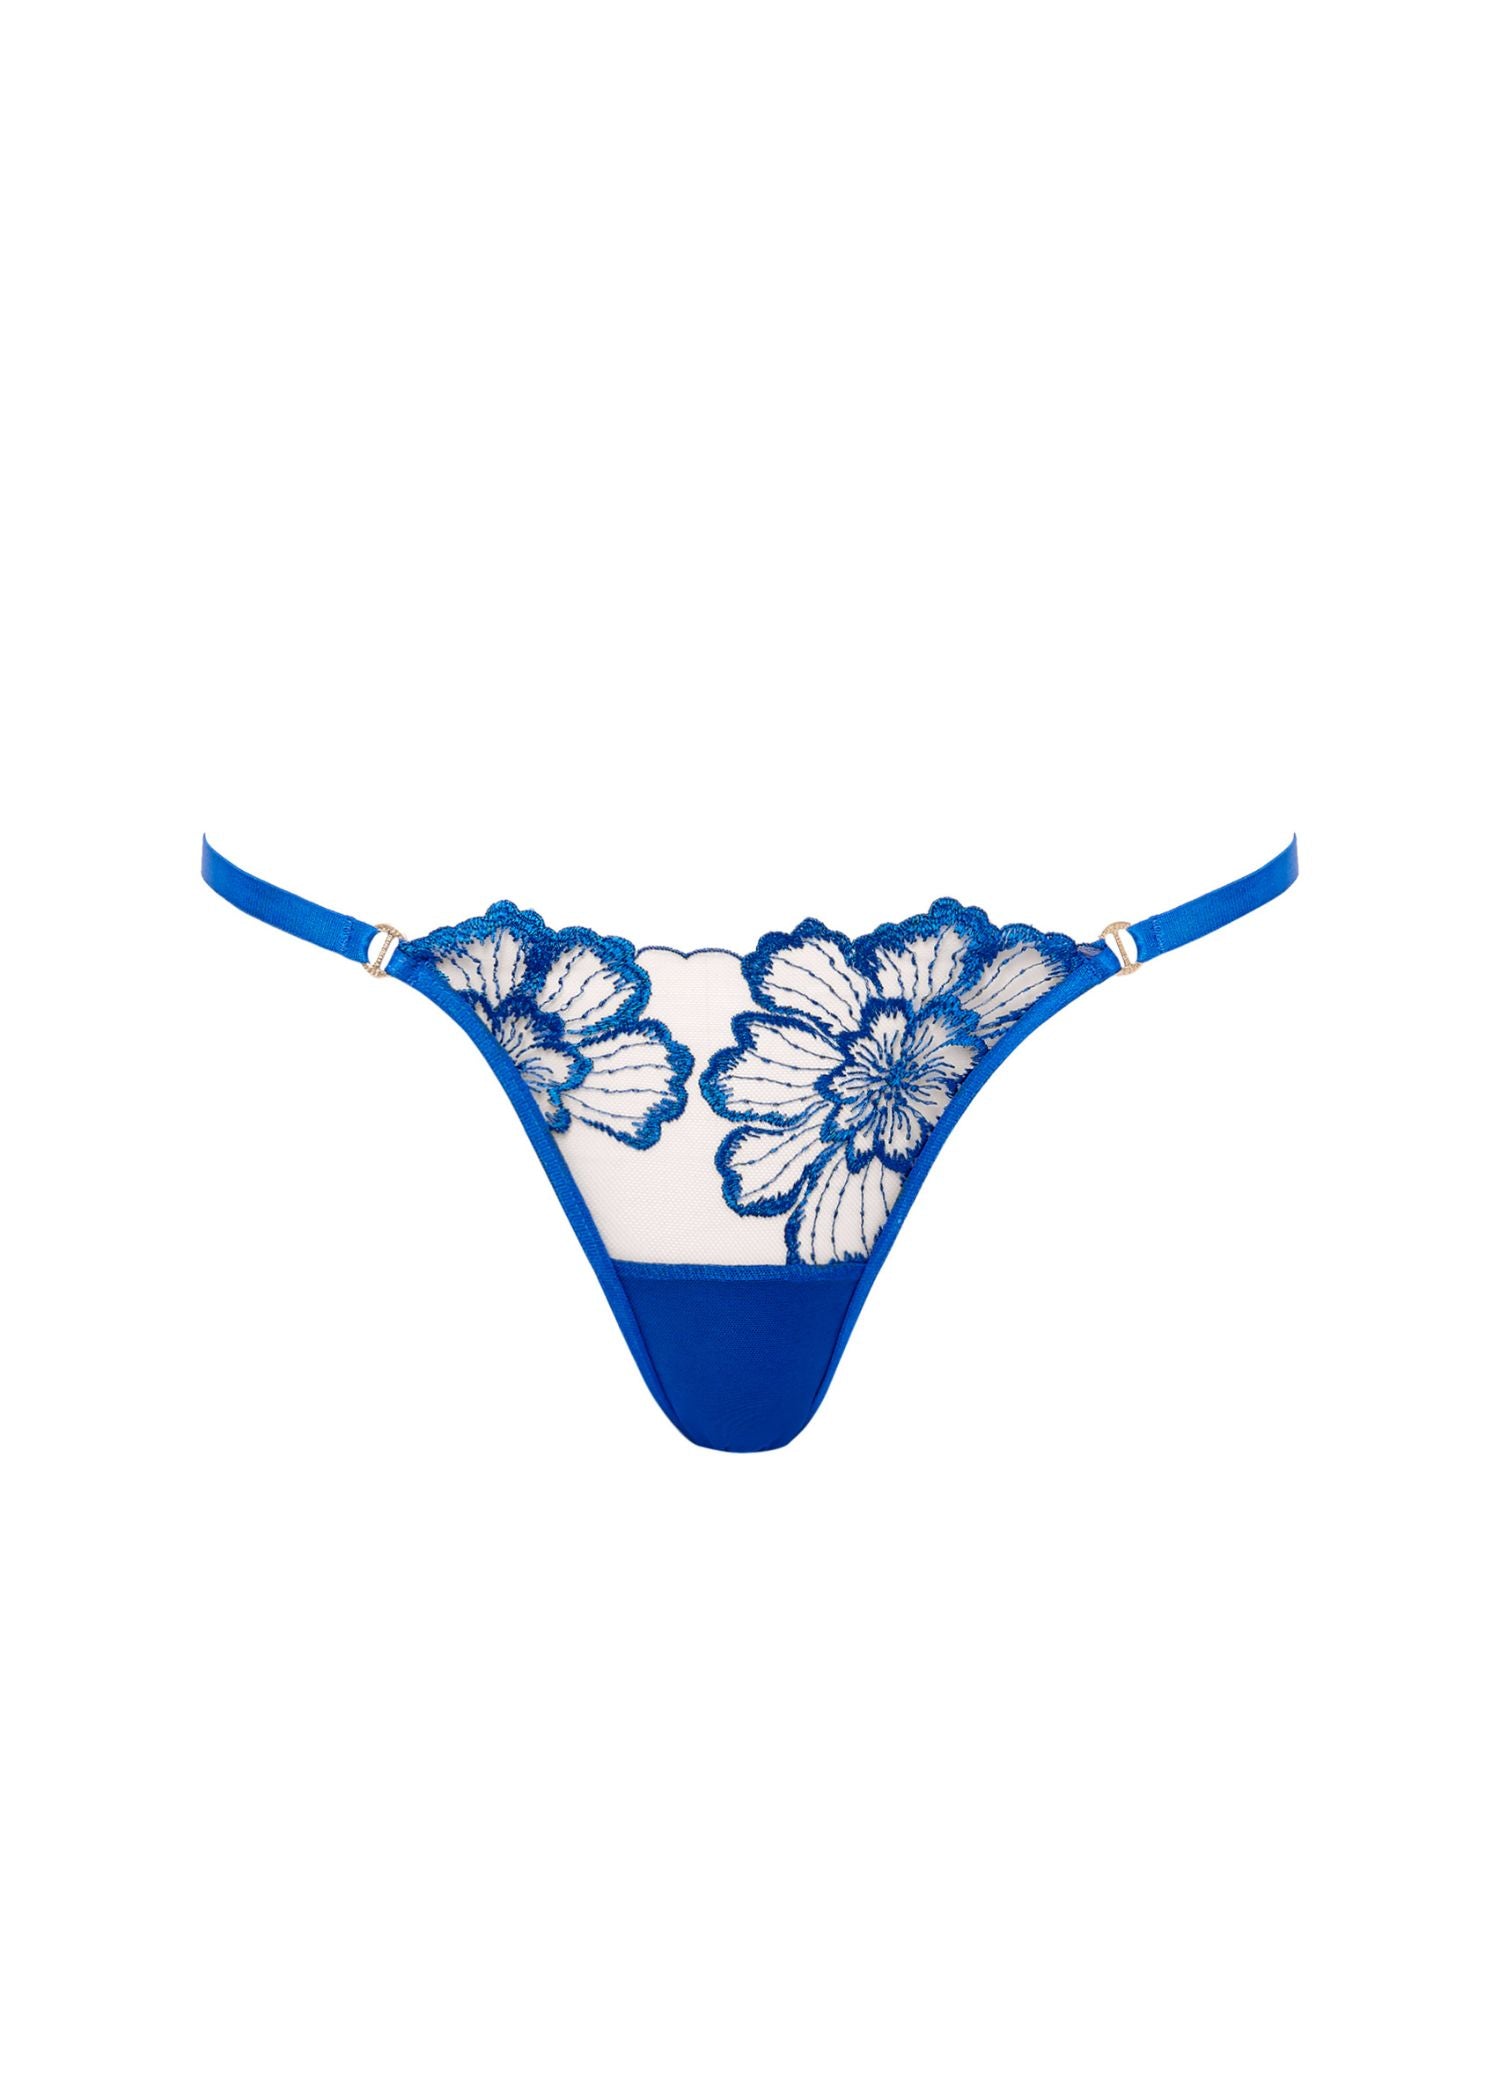 Bluebella CATALINA Panty (Egyptian Blue/Sheer) | Avec Amour Sexy Lingerie